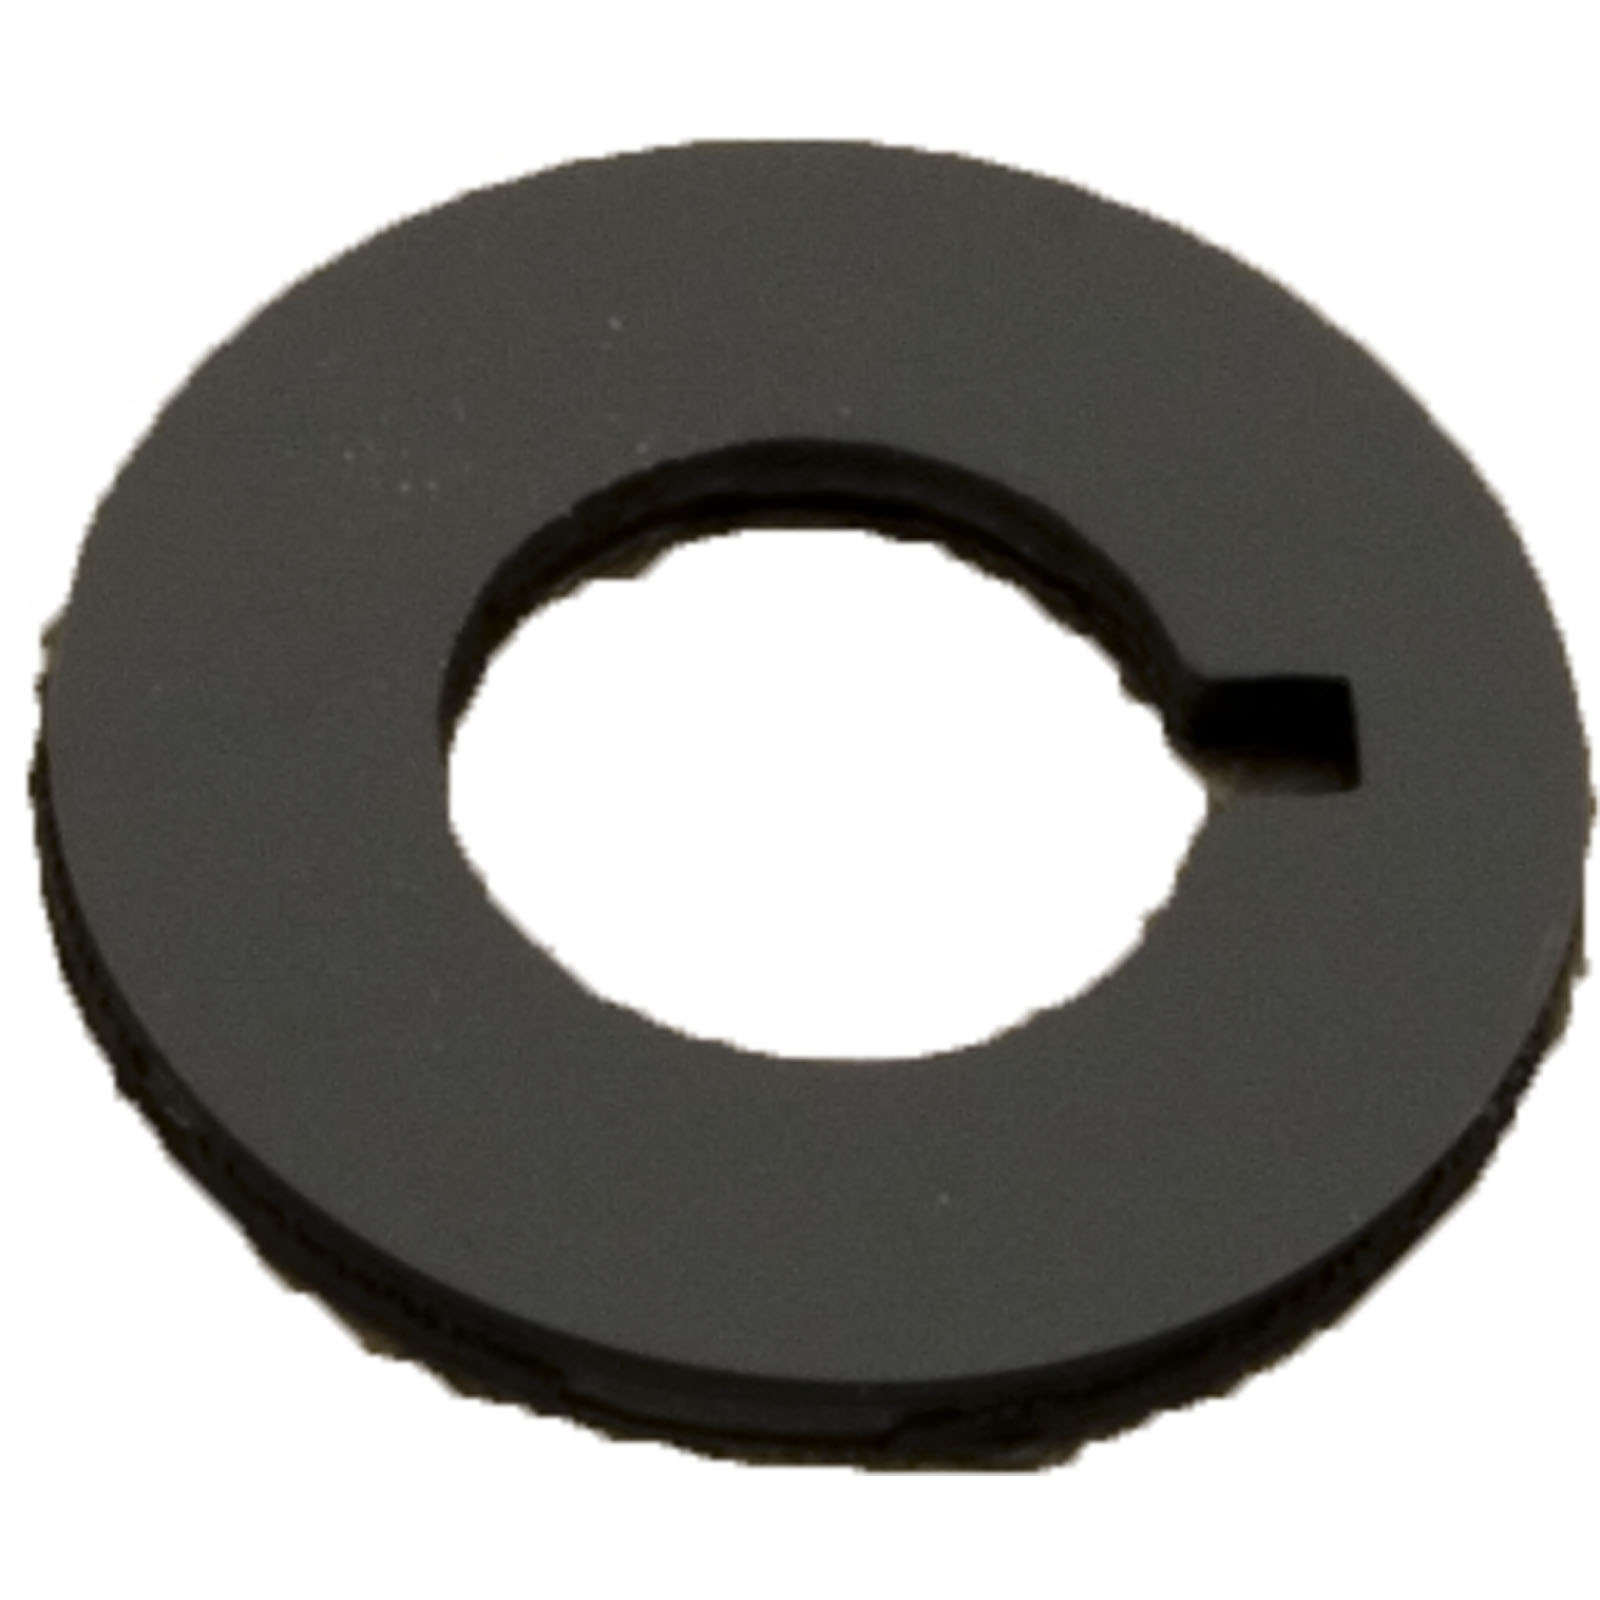 Picture of 3153000 Control Knob JWB Spacer